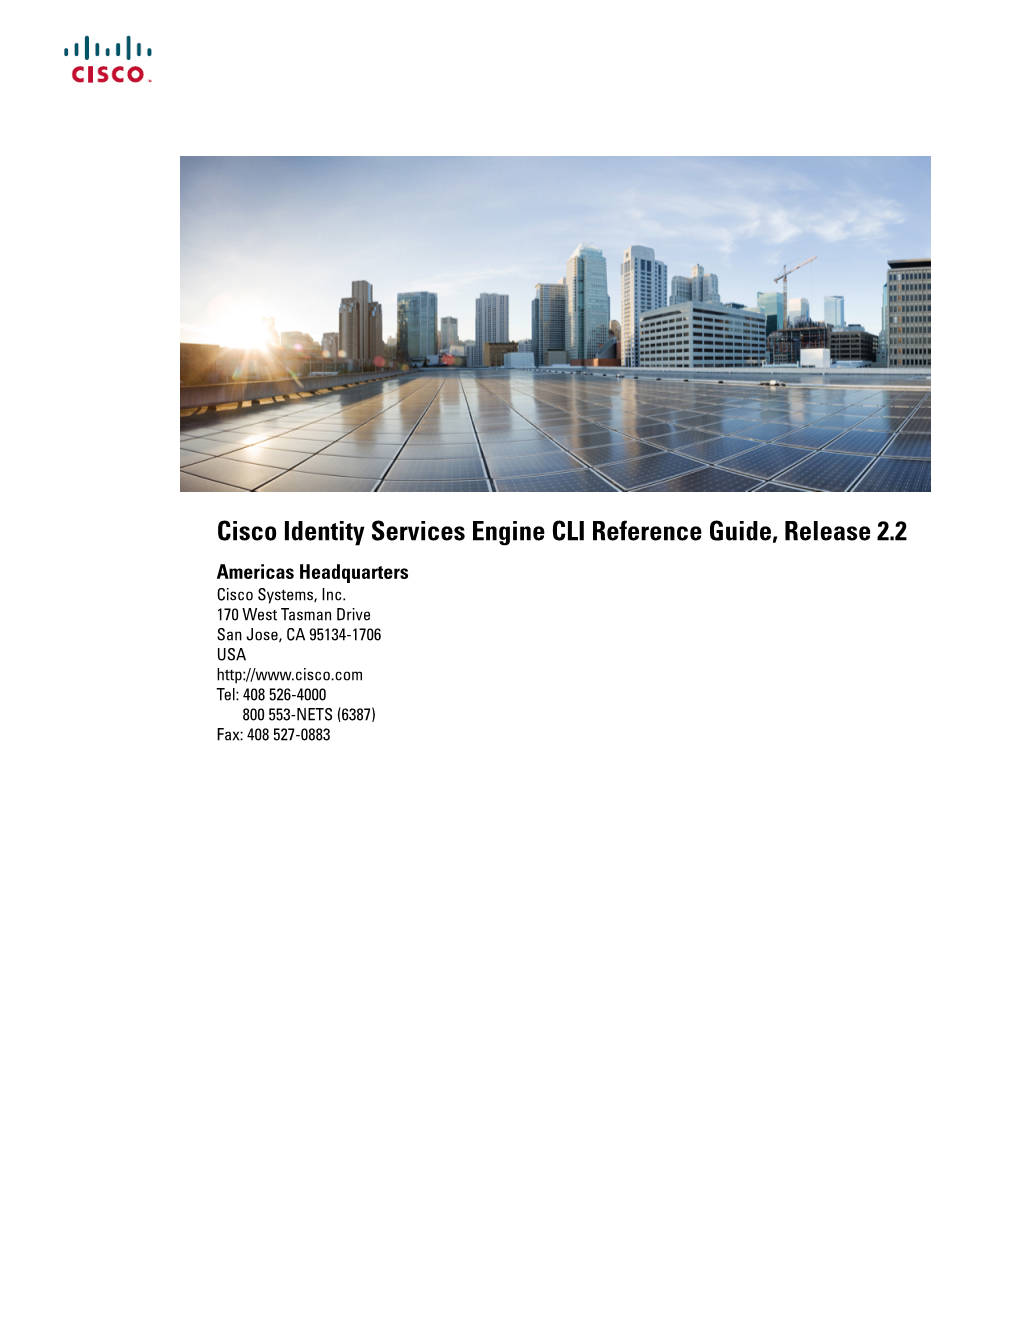 Cisco Identity Services Engine CLI Reference Guide, Release 2.2 Americas Headquarters Cisco Systems, Inc